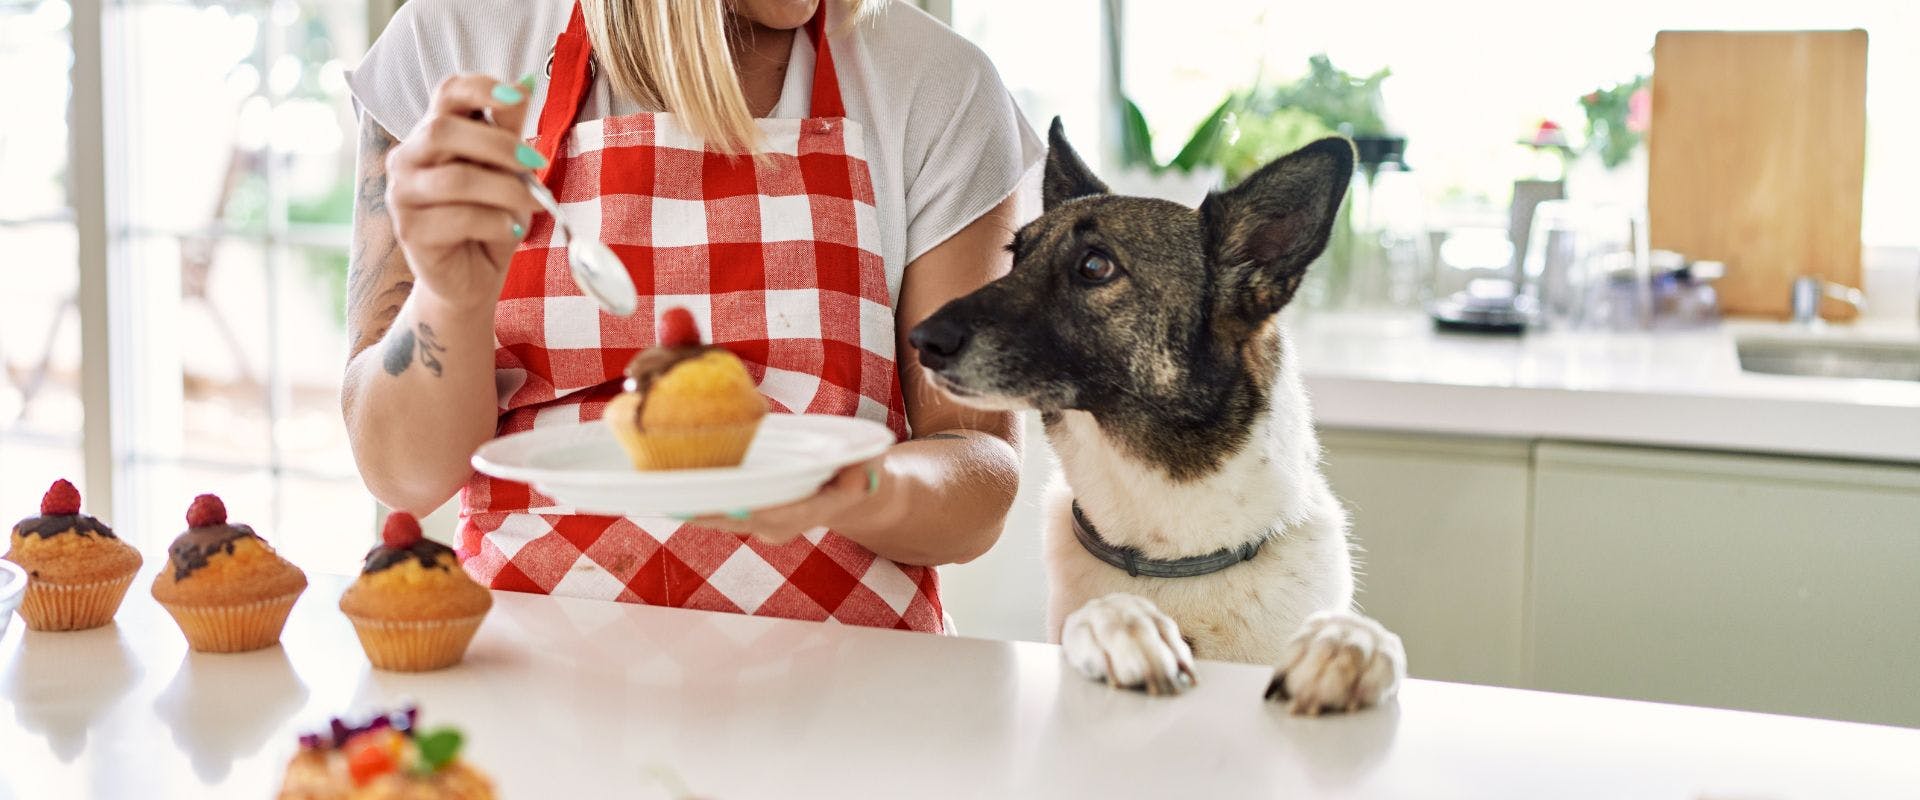 Black and white dog jumping up at the kitchen side while owner is decorating cakes